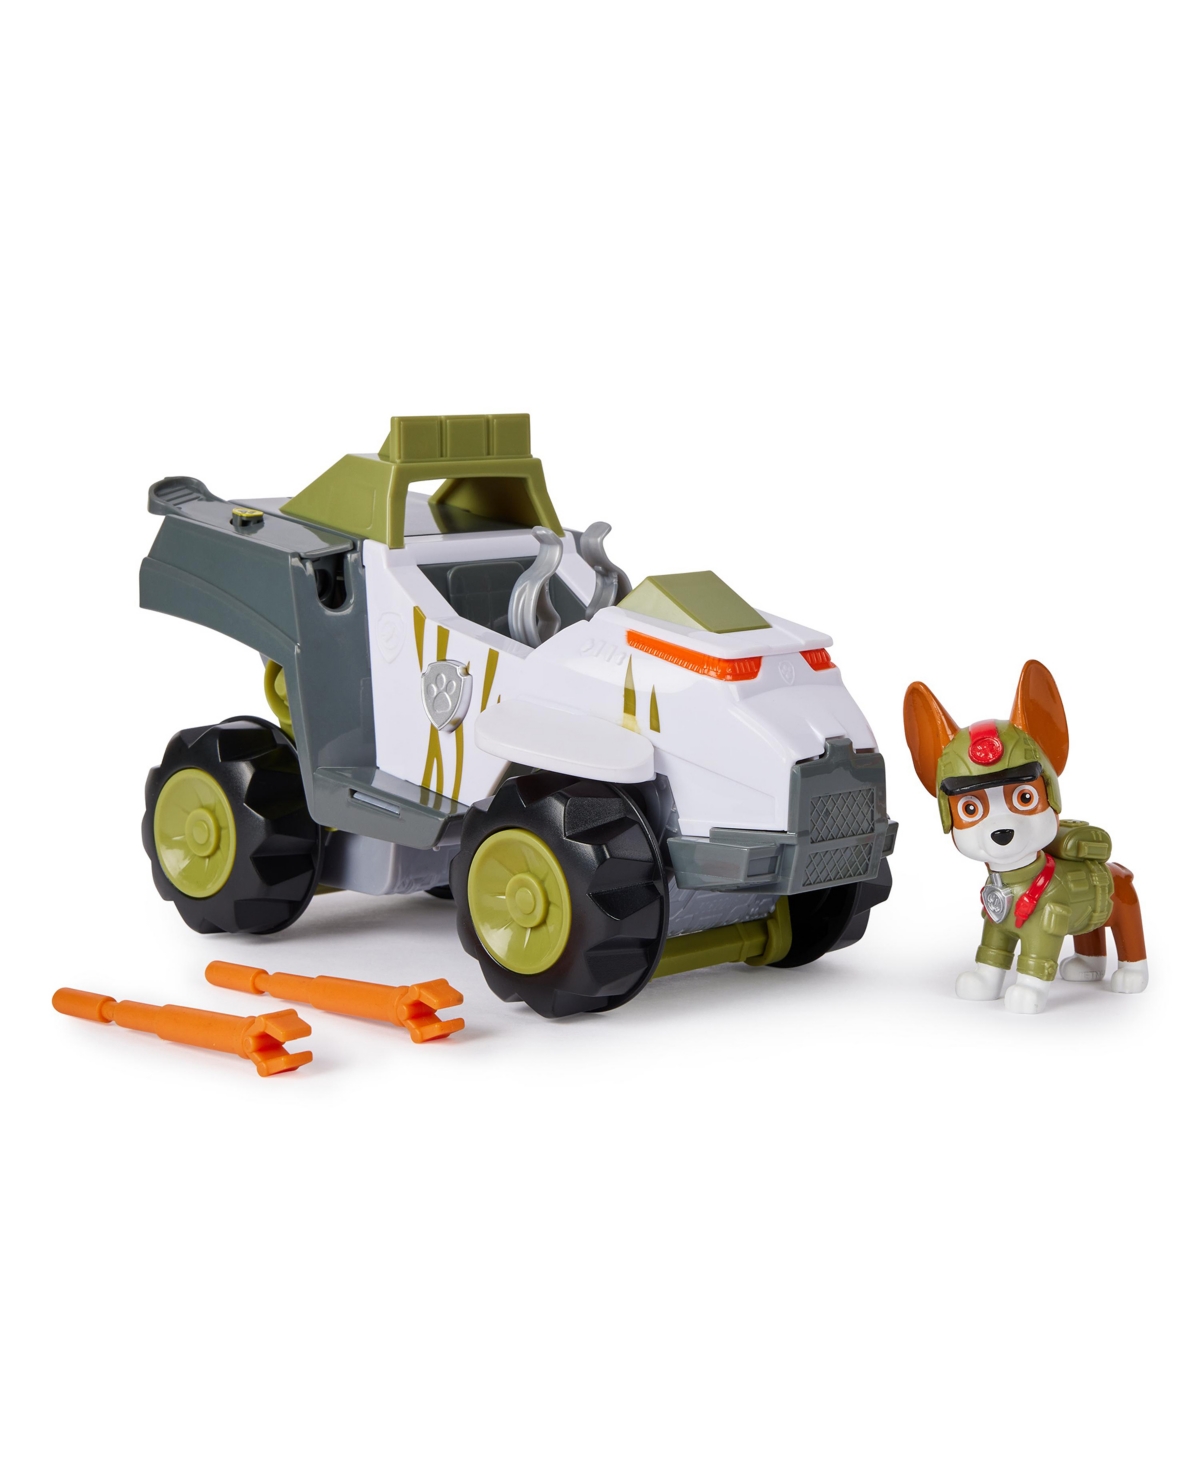 Paw Patrol Kids' Jungle Pups, Tracker's Monkey Vehicle, Toy Truck With Collectible Action Figure In Multi